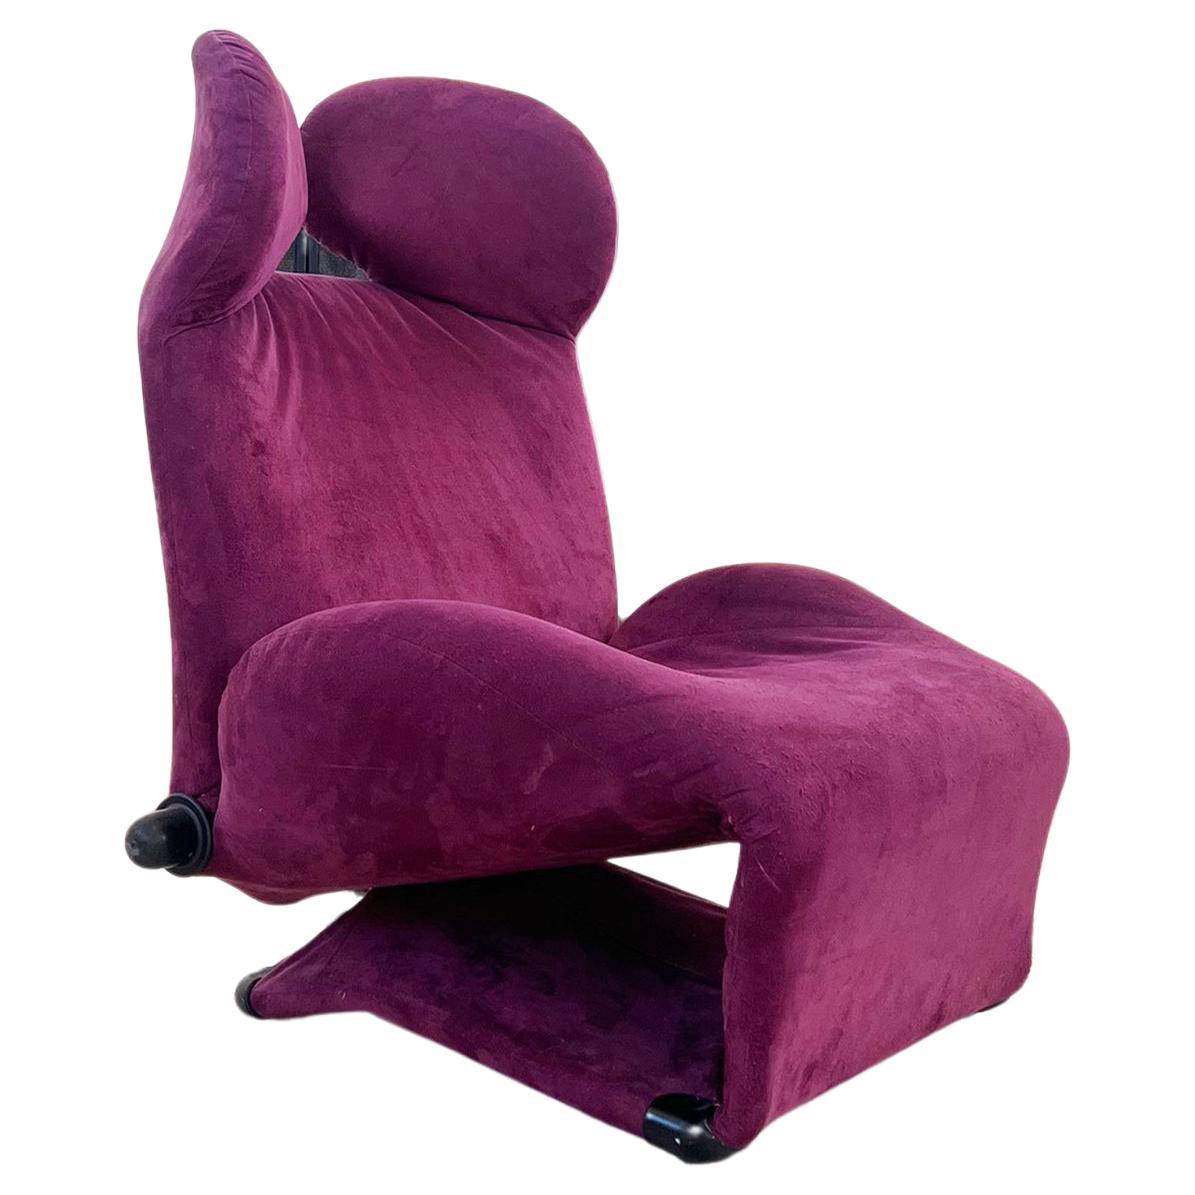 V.Cool Purple Suede Cassina 111 Wink Chaise Lounge by Toshiyuki Kita Japan Italy For Sale